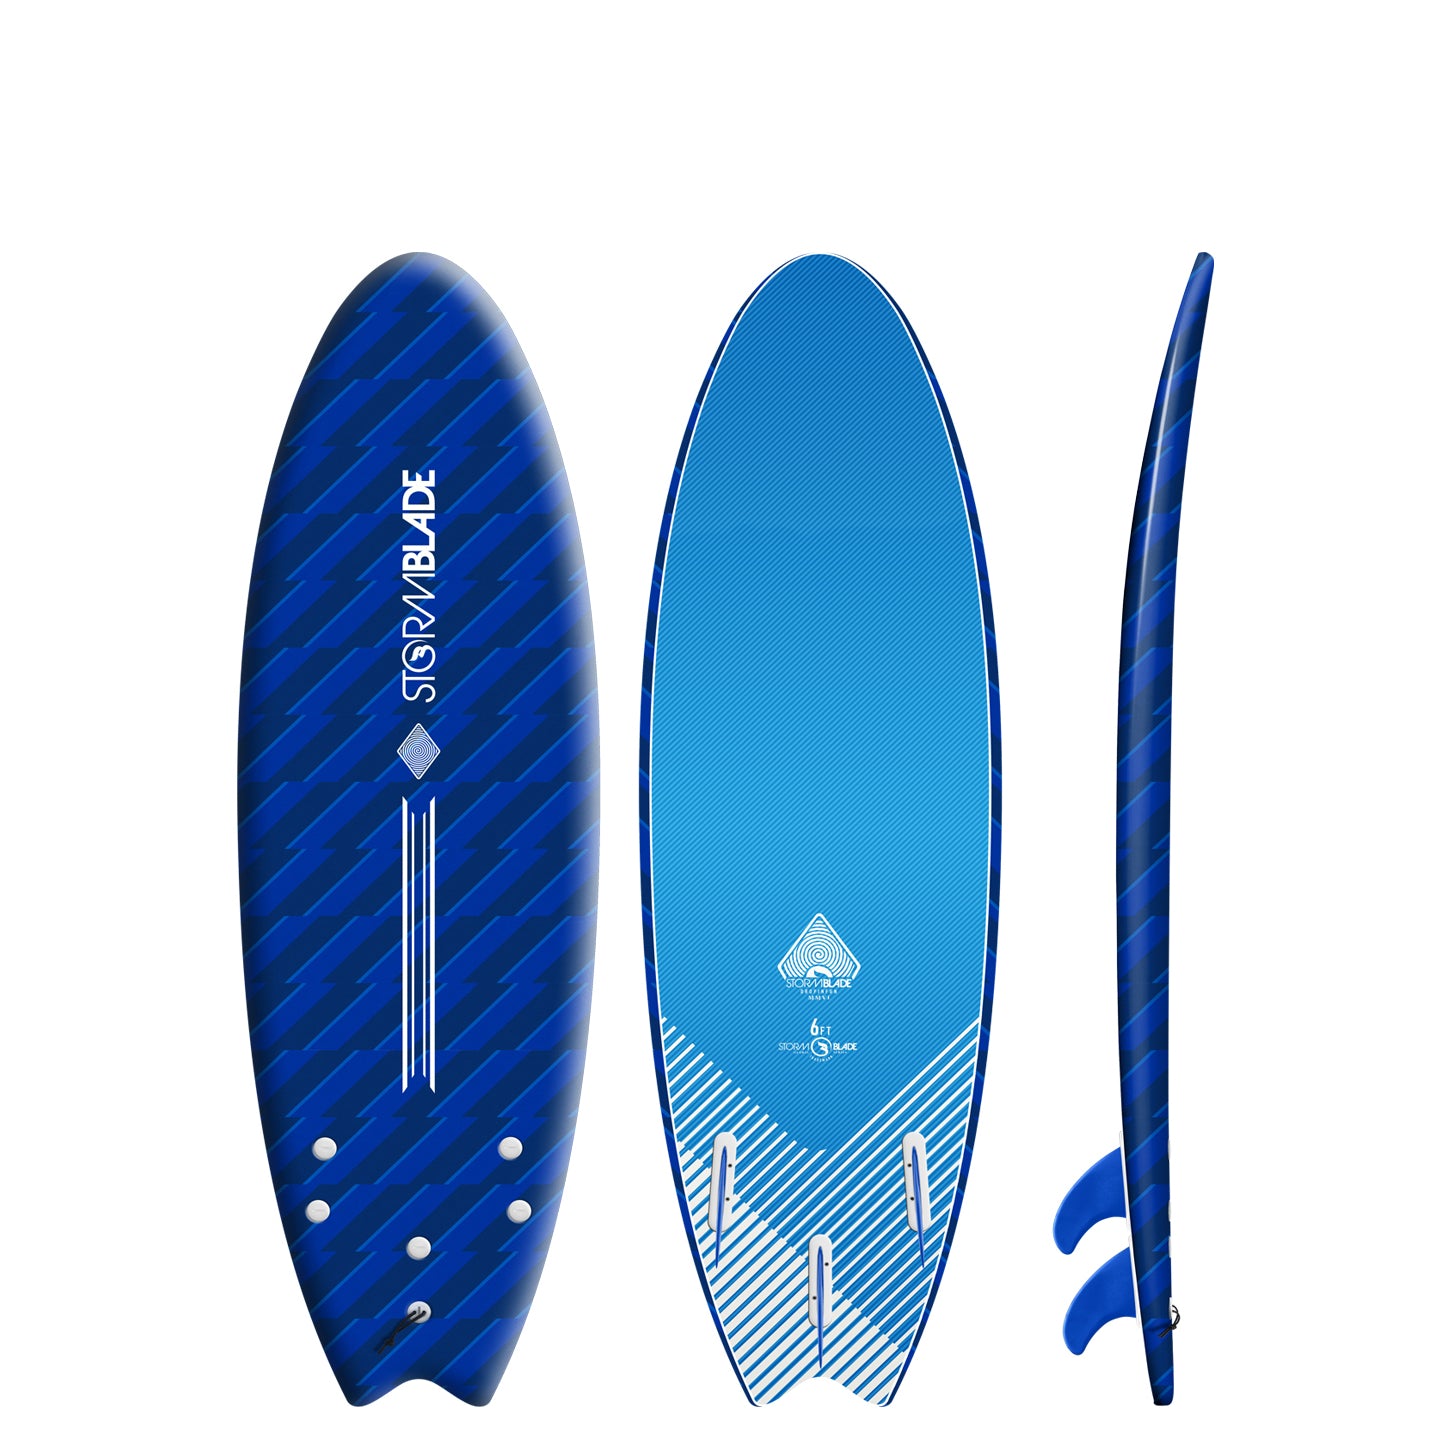 Storm Blade Swallow Tail Surfboard Blizzard Navy 6ft0in